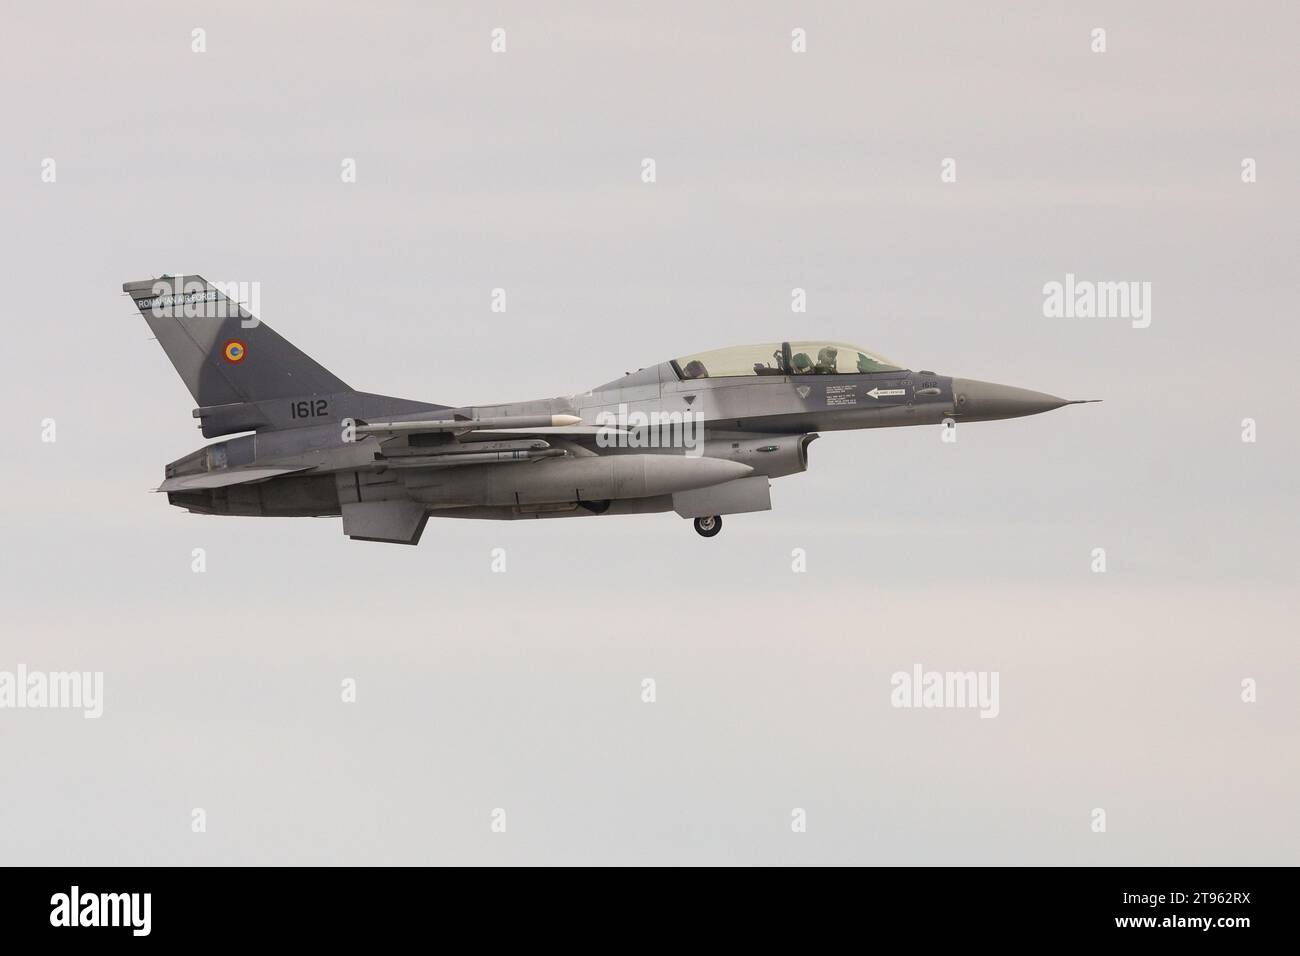 Borcea, Romania - November 13, 2023: A Romanian military jet pilot flies his F16 Falcon during a demonstration following the opening ceremony for the Stock Photo